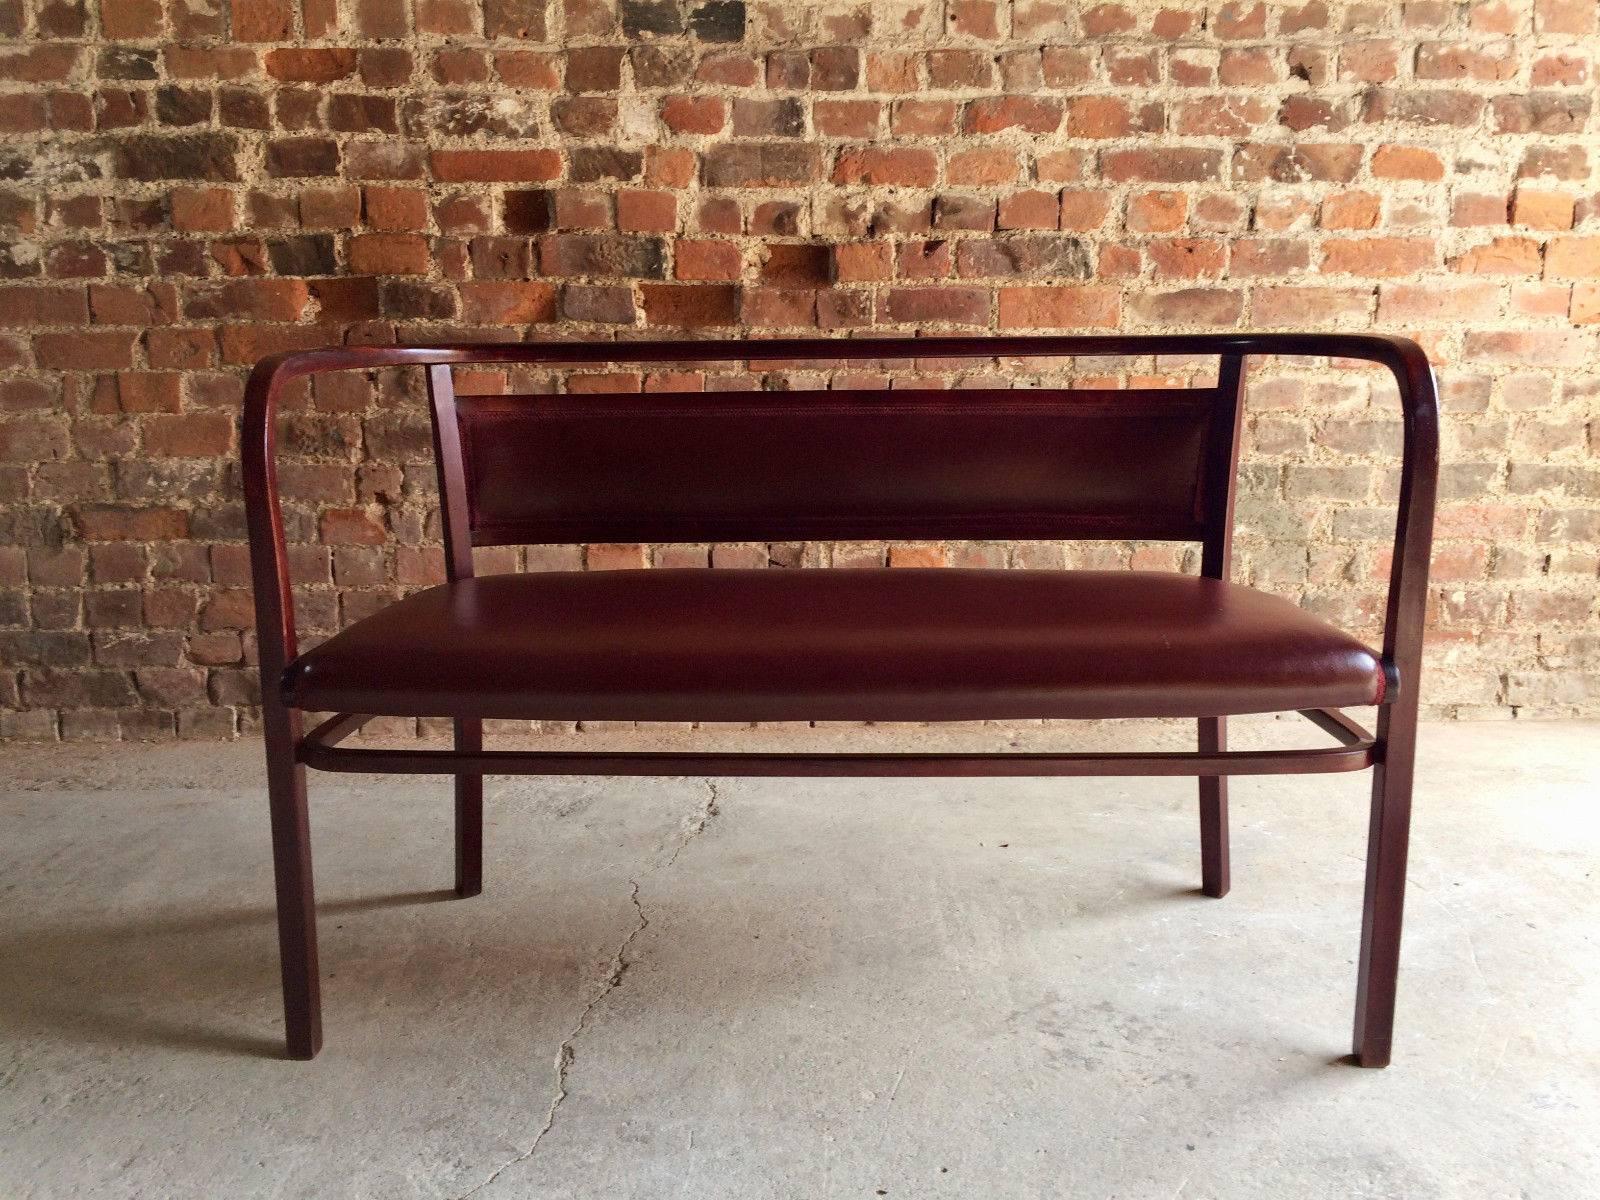 A magnificent Otto Wagner for Thonet stained beech bentwood sofa or bench, designed and dating to 1908, upholstered in burgundy vinyl with matching braiding, makers mark and branded to underside - 'Thonet 3' with applied label in Cyrillic script,